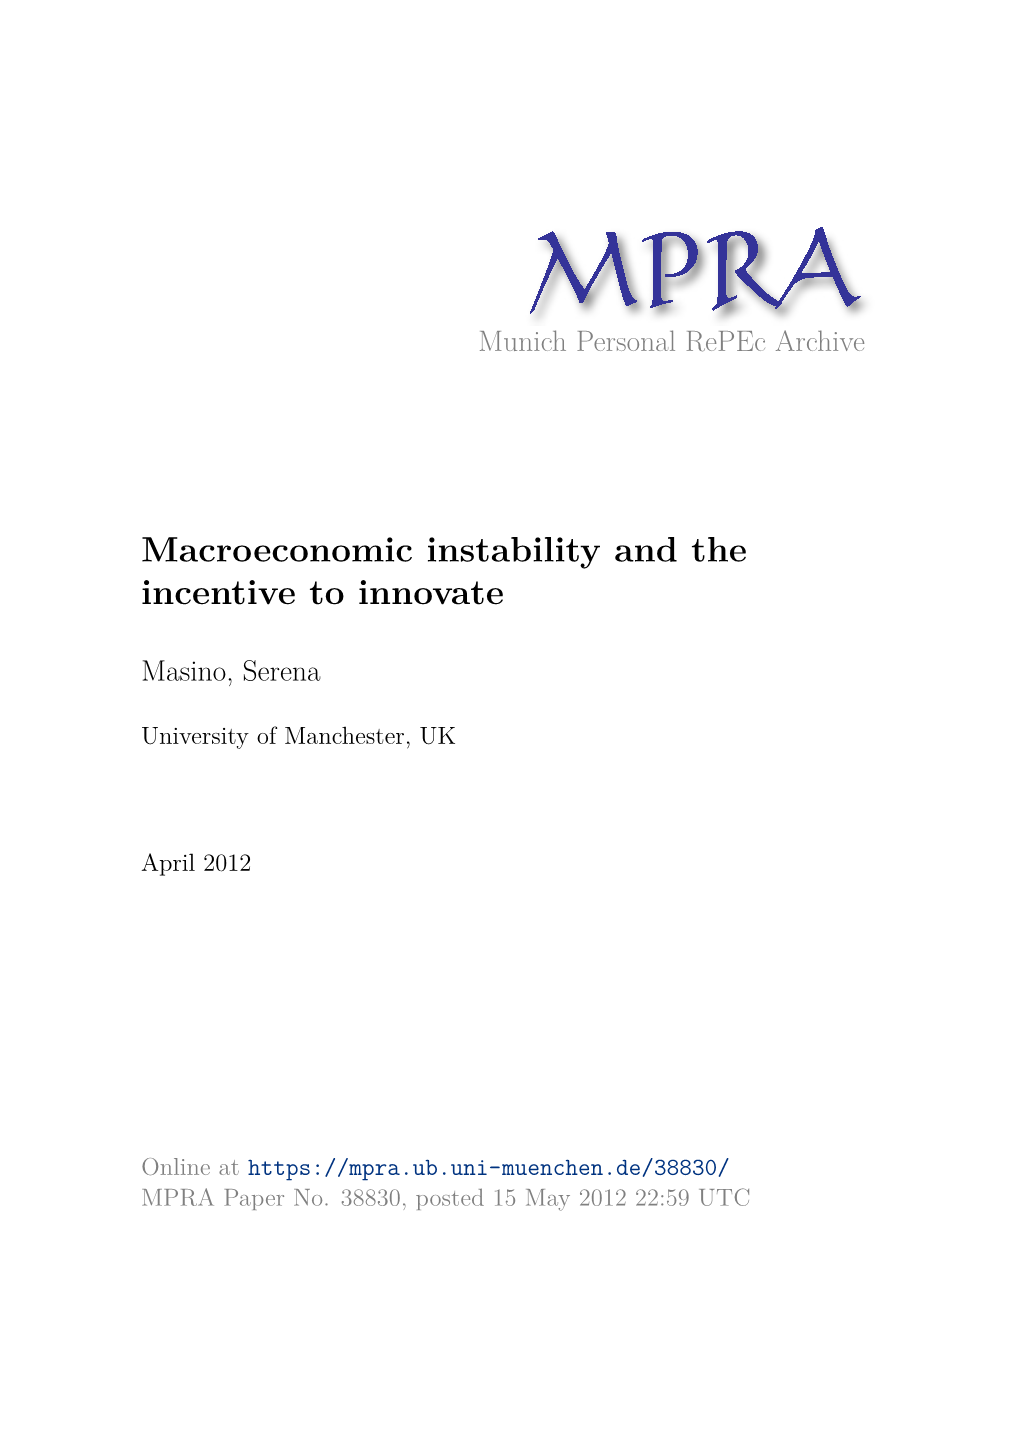 Macroeconomic Instability and the Incentive to Innovate